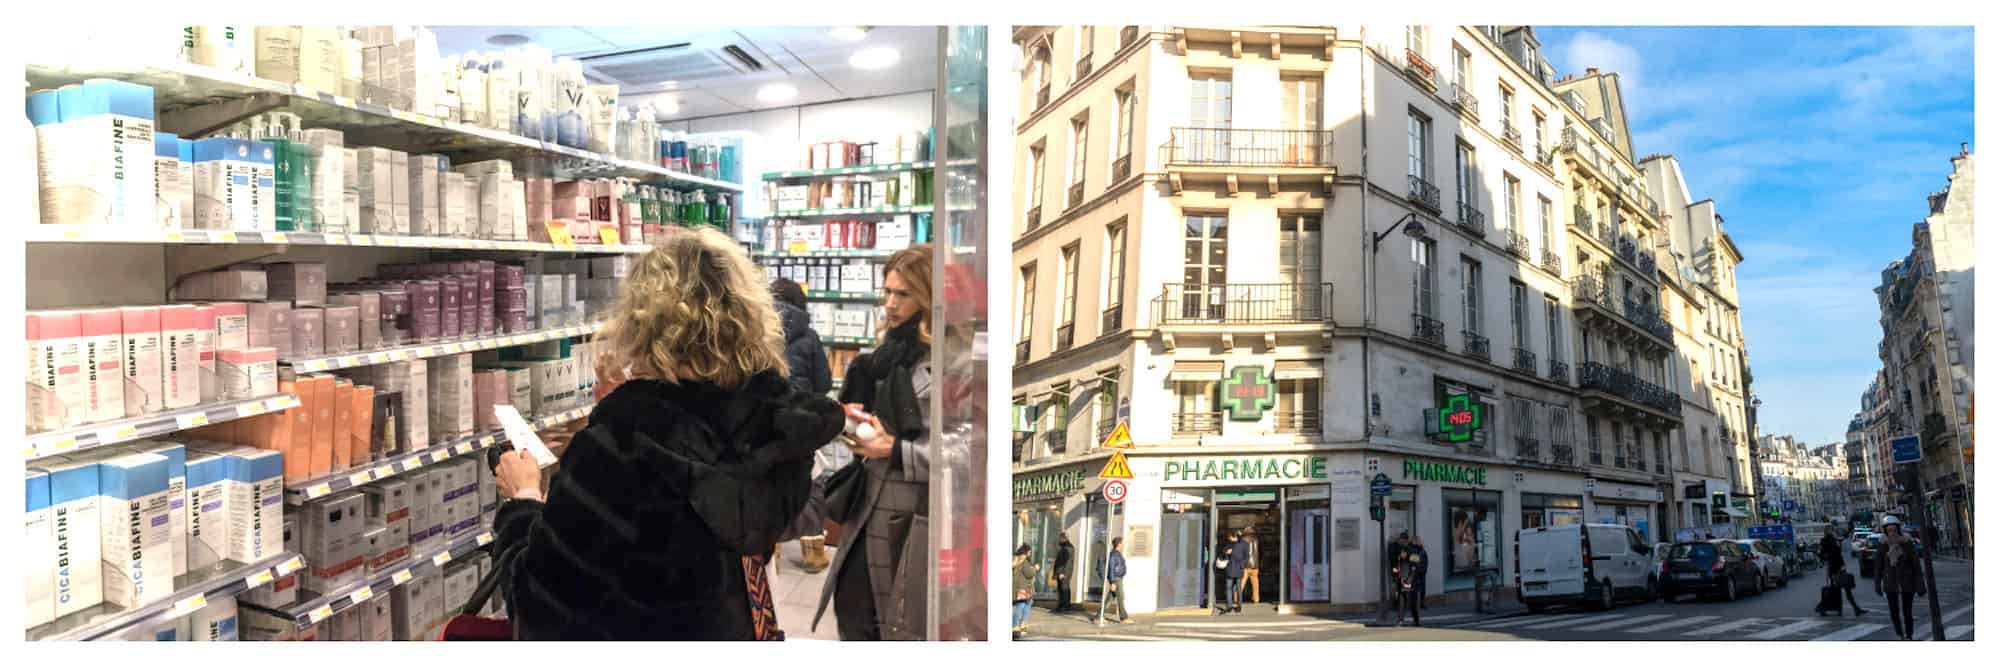 Shopping for discounted French beauty products at pharmacy Citypharma in Paris (left). Outside the best place to buy French beauty products in Paris, Citypharma (right).